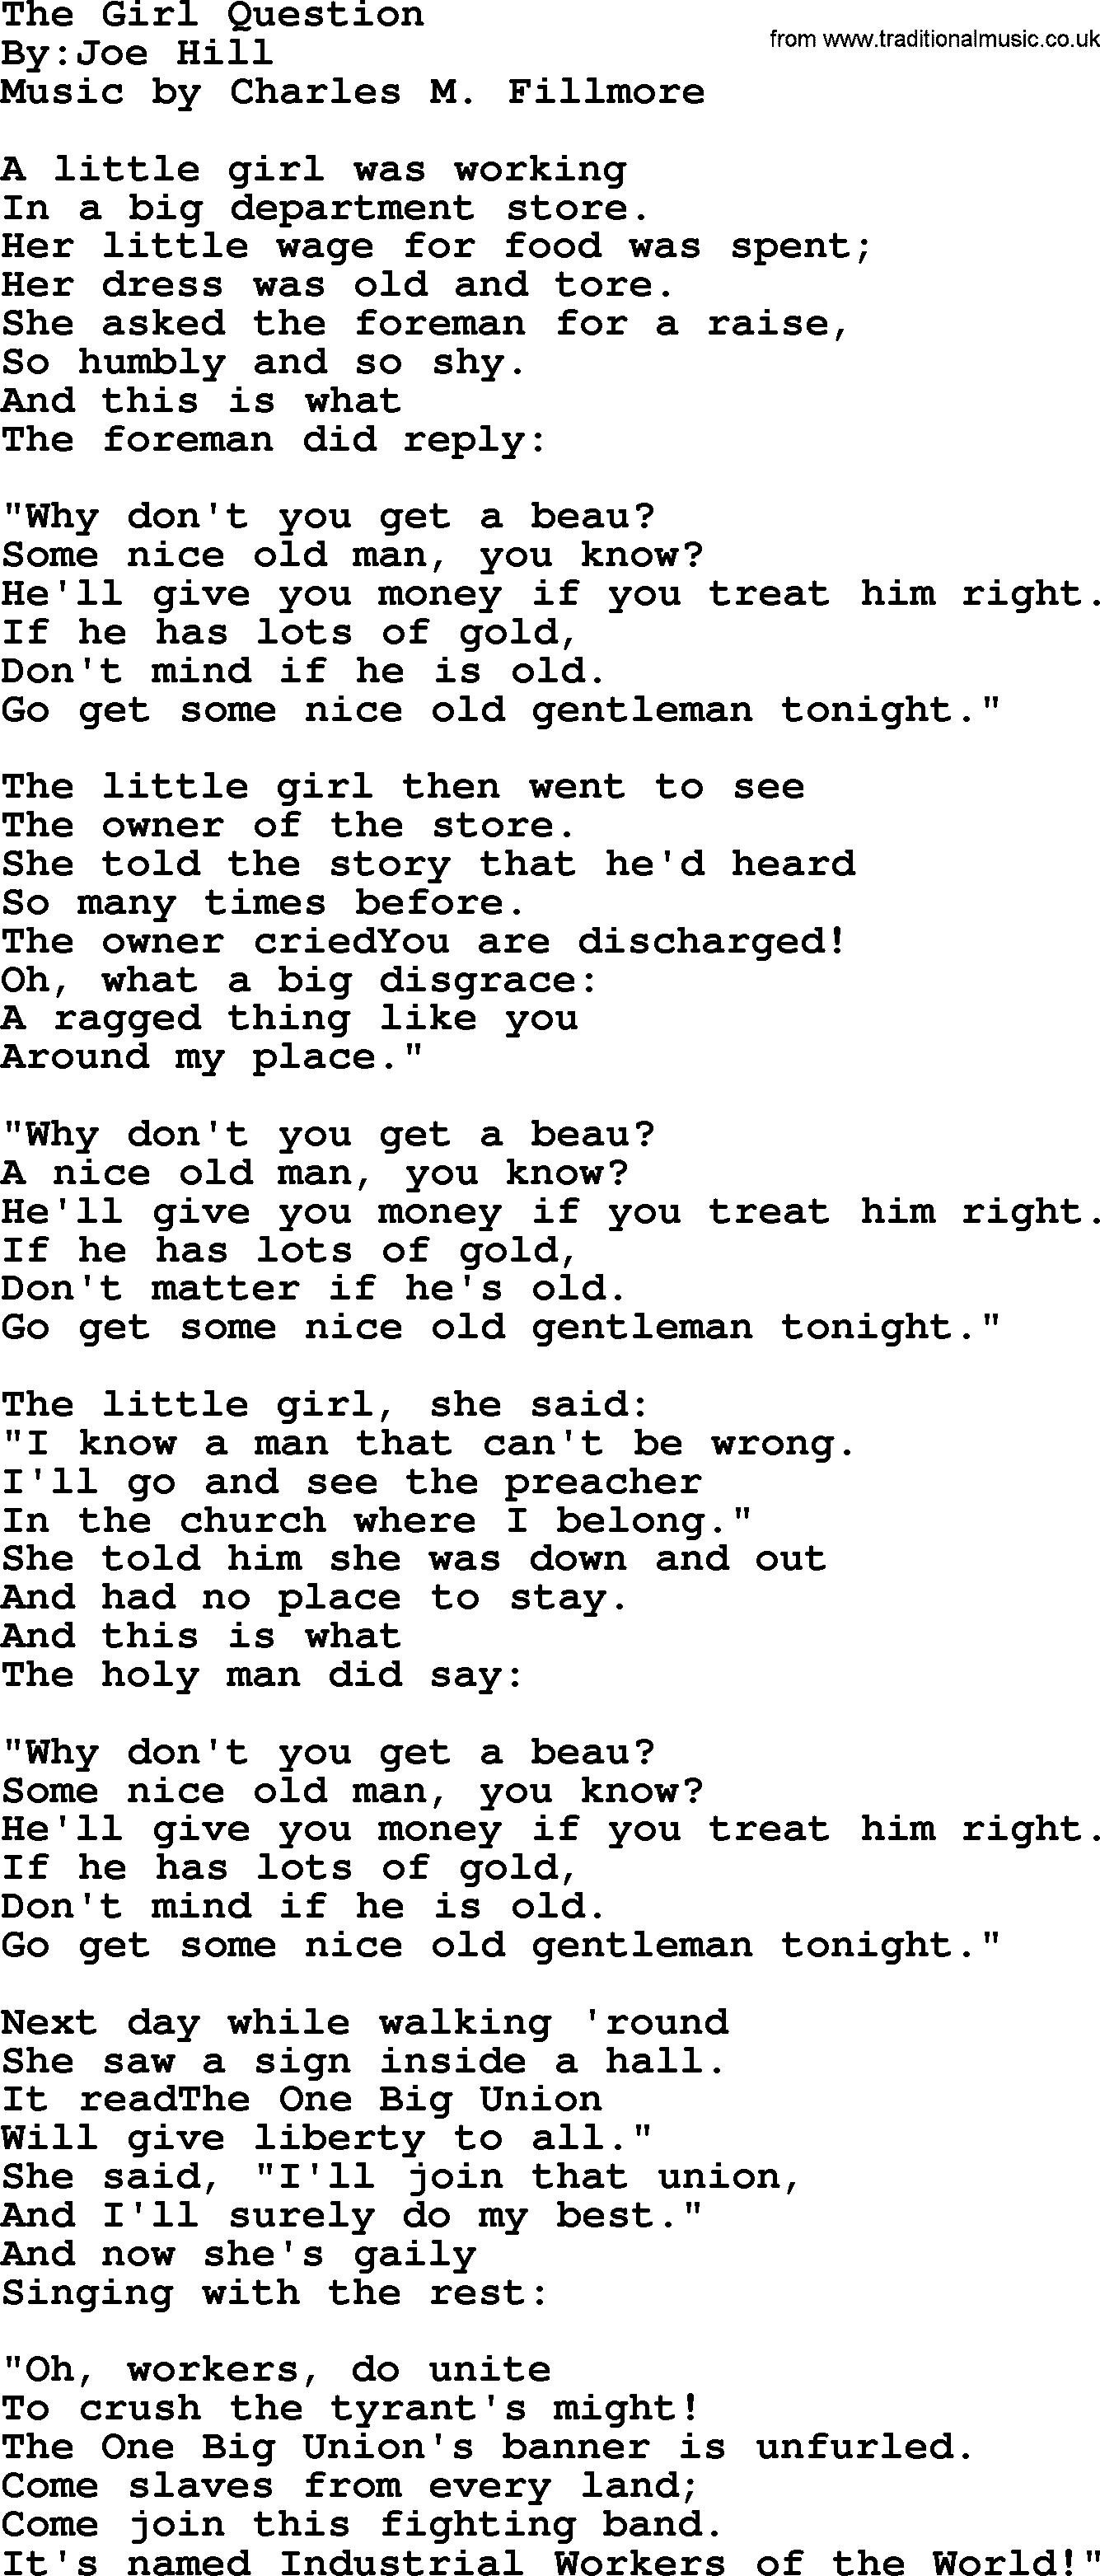 Political, Solidarity, Workers or Union song: The Girl Question, lyrics